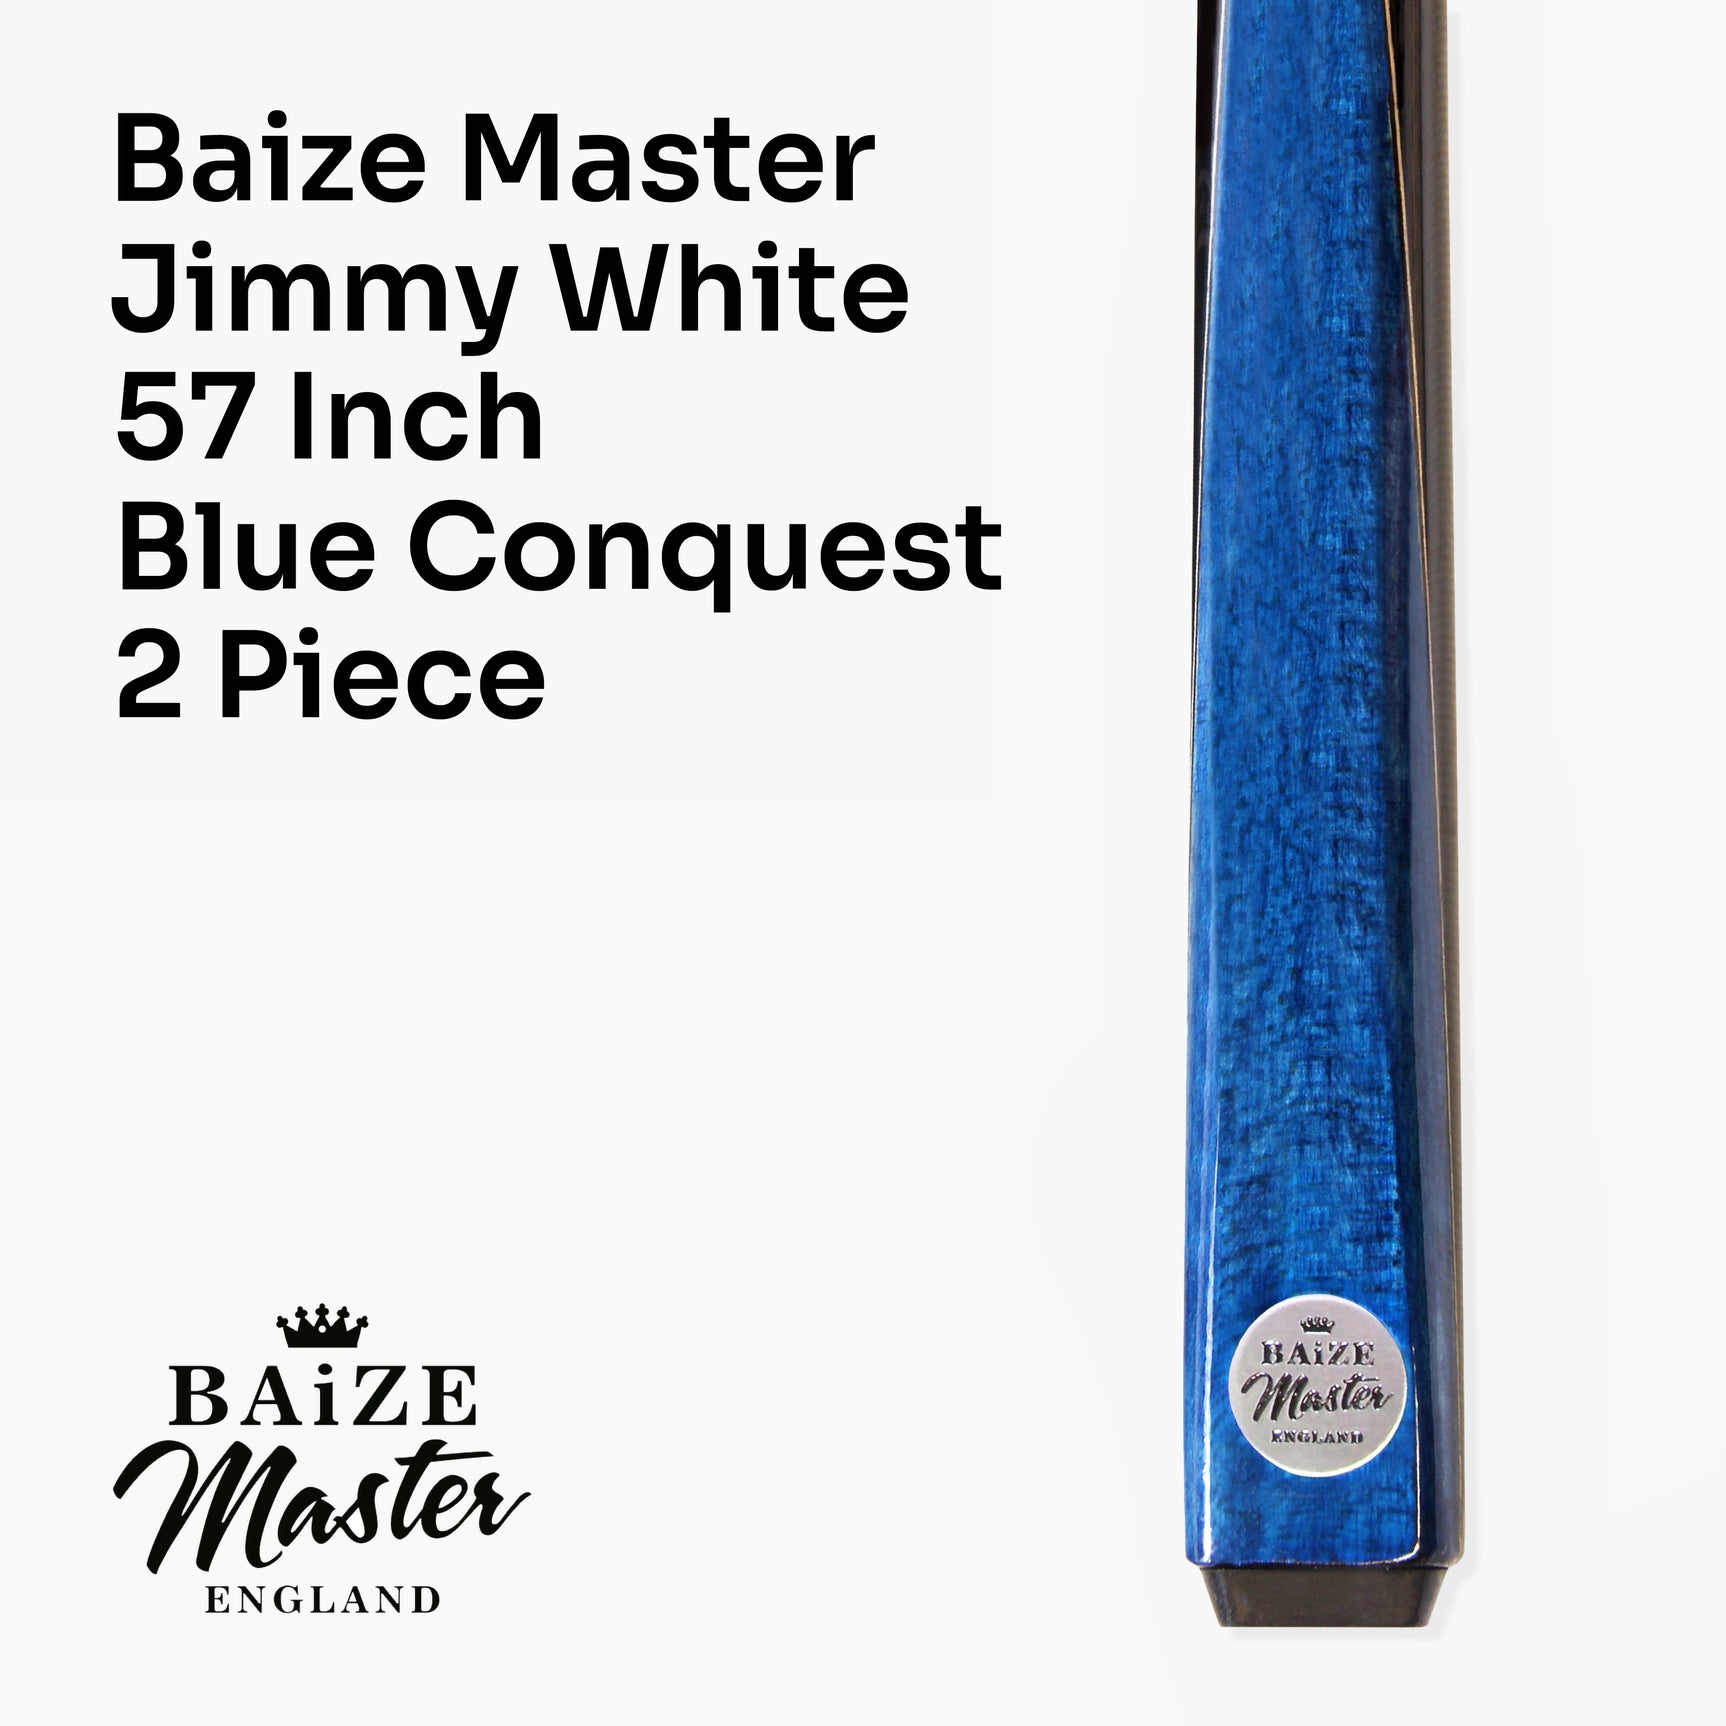 Baize Master JIMMY WHITE Signature CONQUEST 57 Inch 2 Piece Snooker Pool Cue 9.5mm Tip